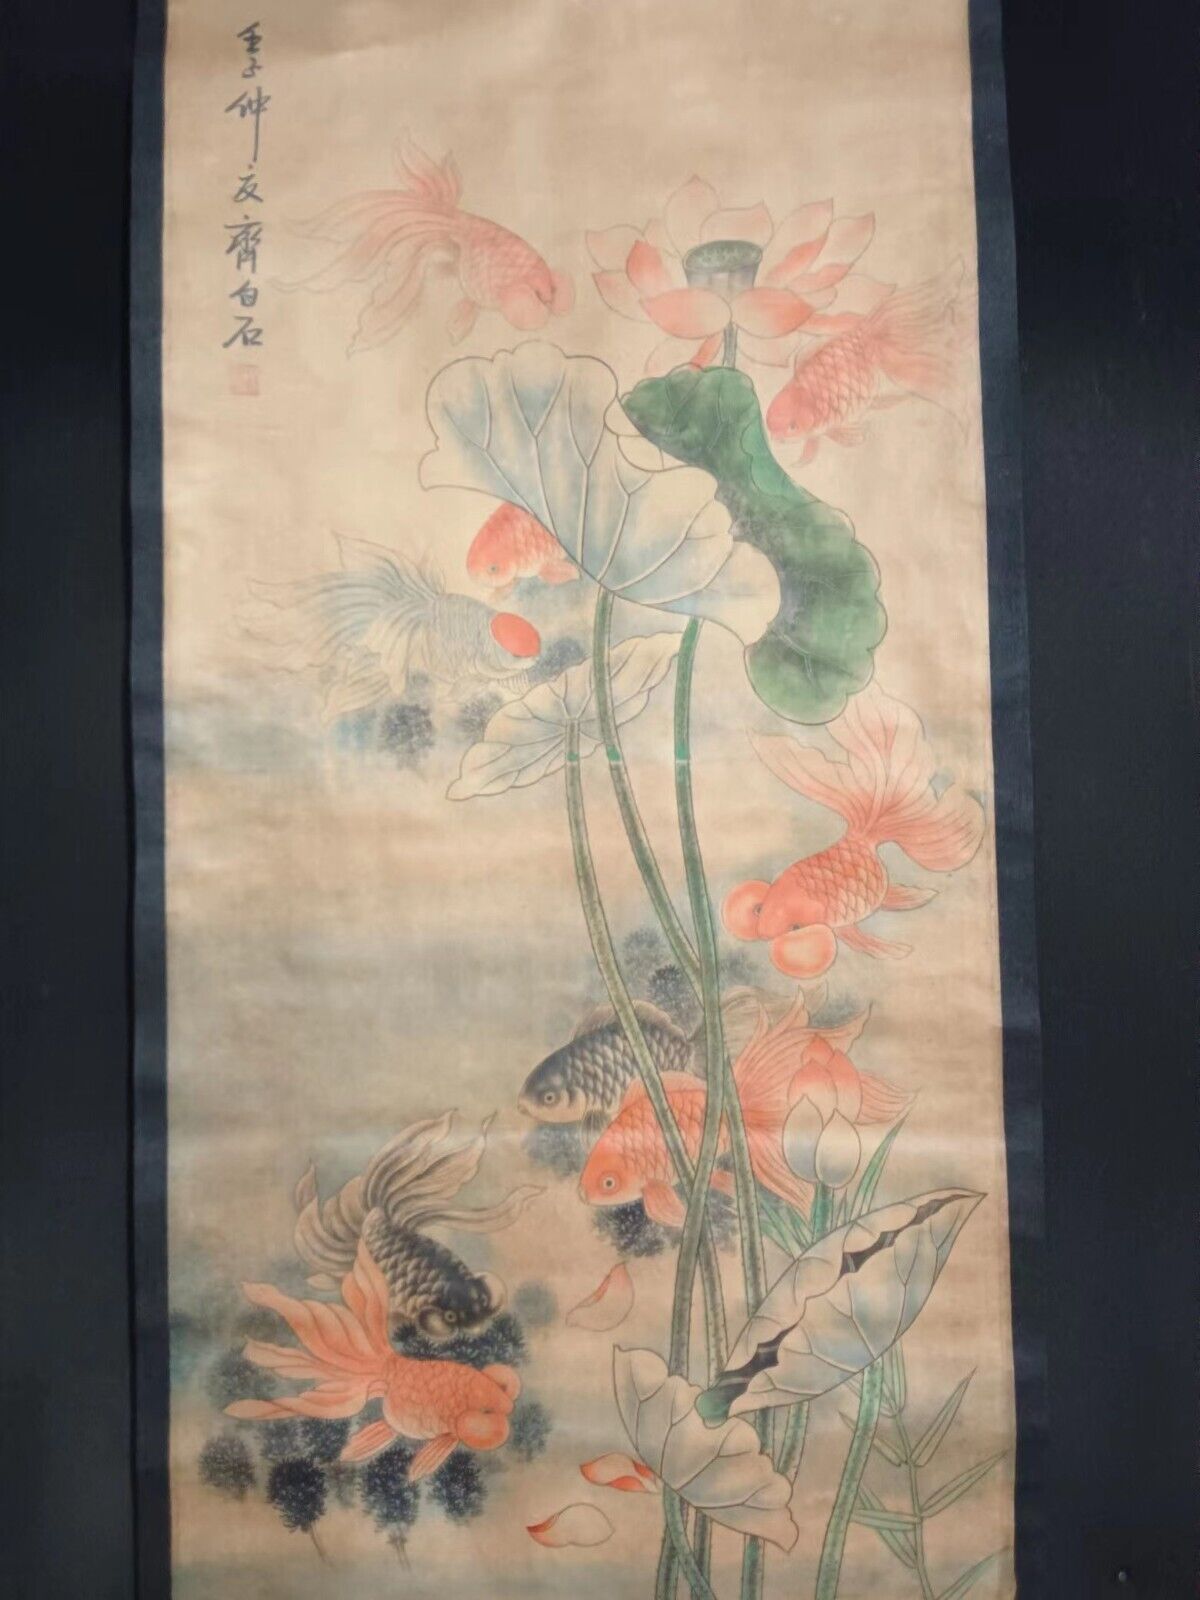 Old Chinese Antique painting scroll Fish and Lotus By Qi Baishi 齐白石 鱼和莲花